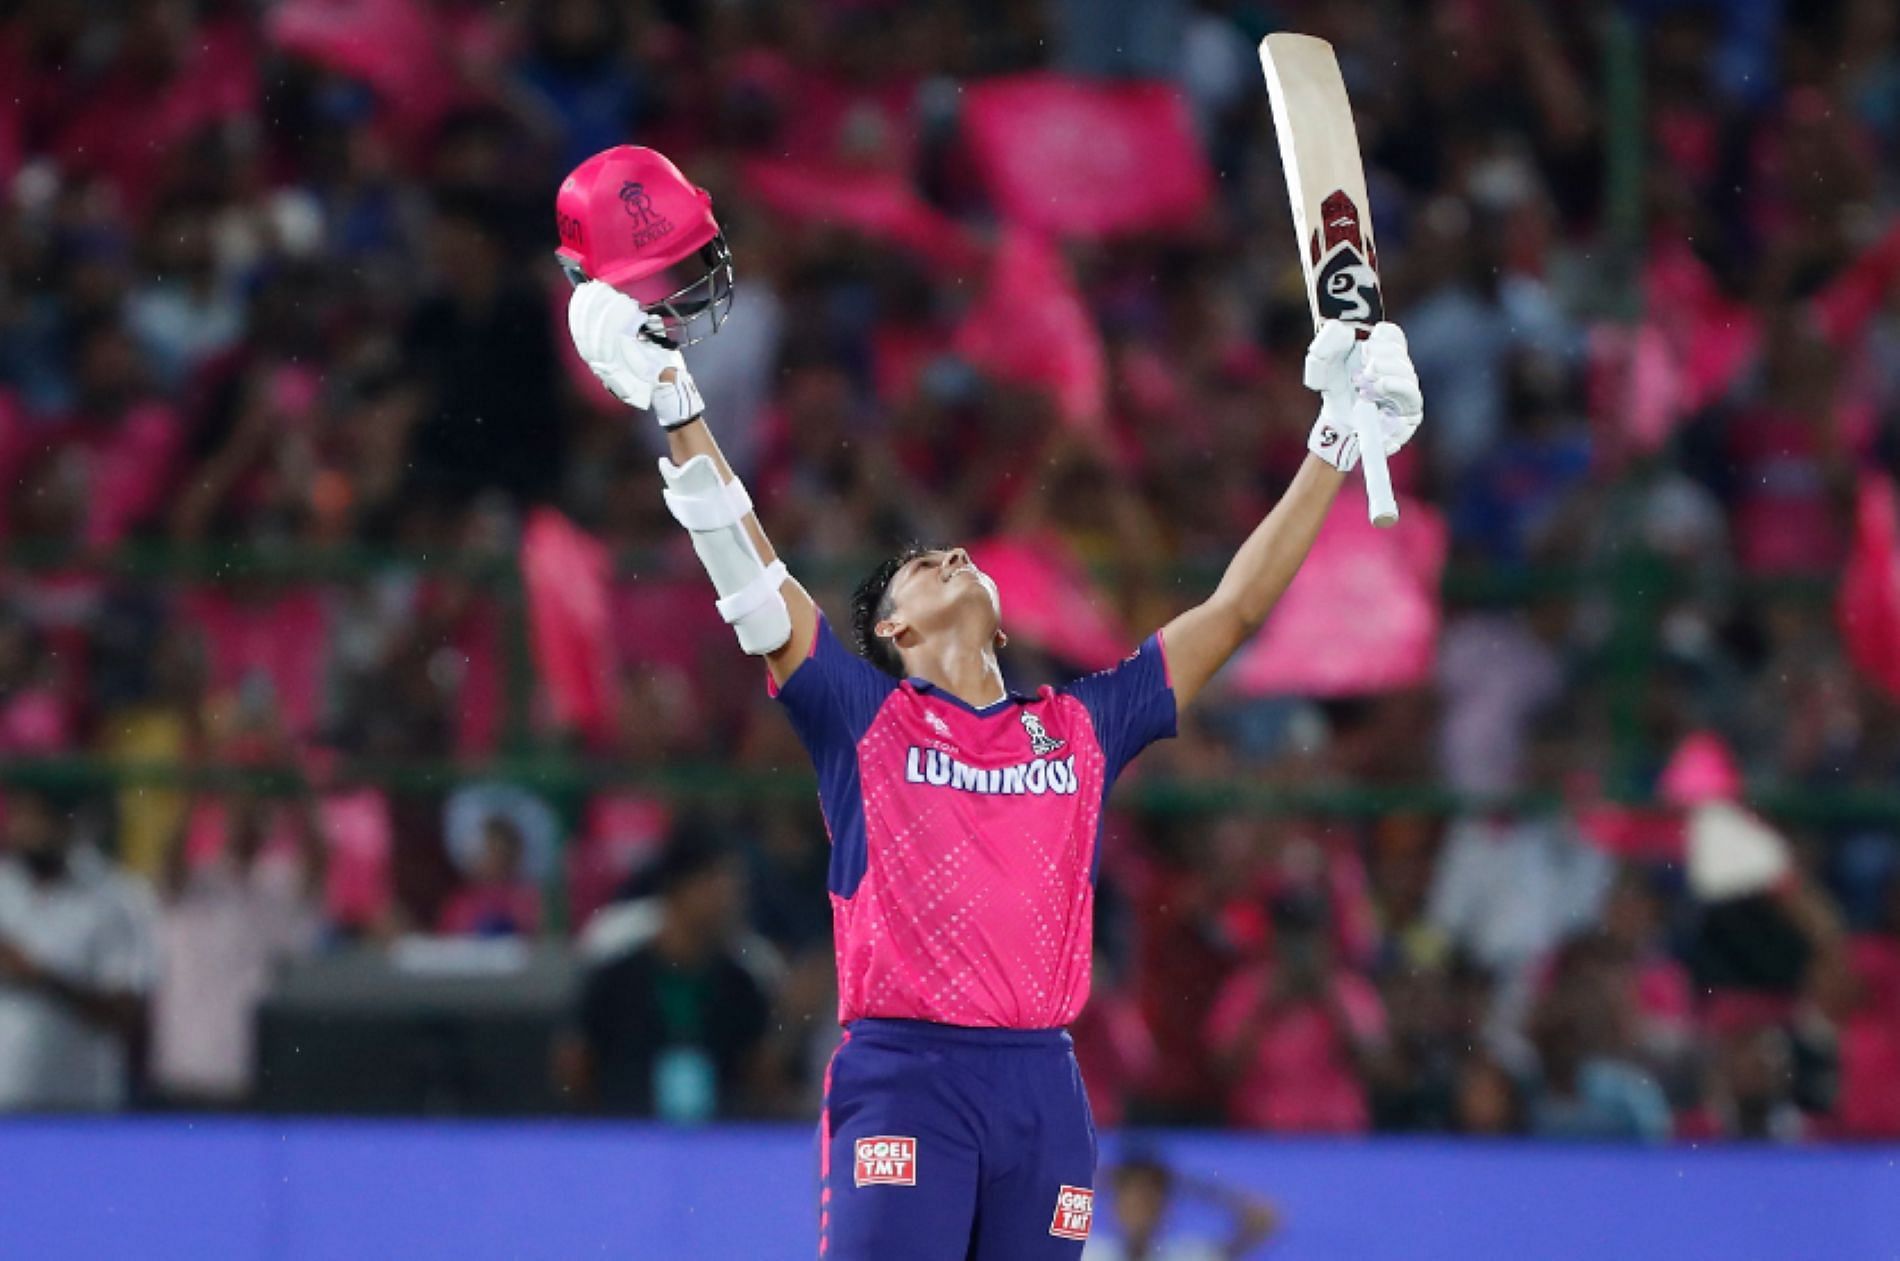 Jaiswal silenced his critics with a breathtaking century [Credit: IPL Twitter handle]